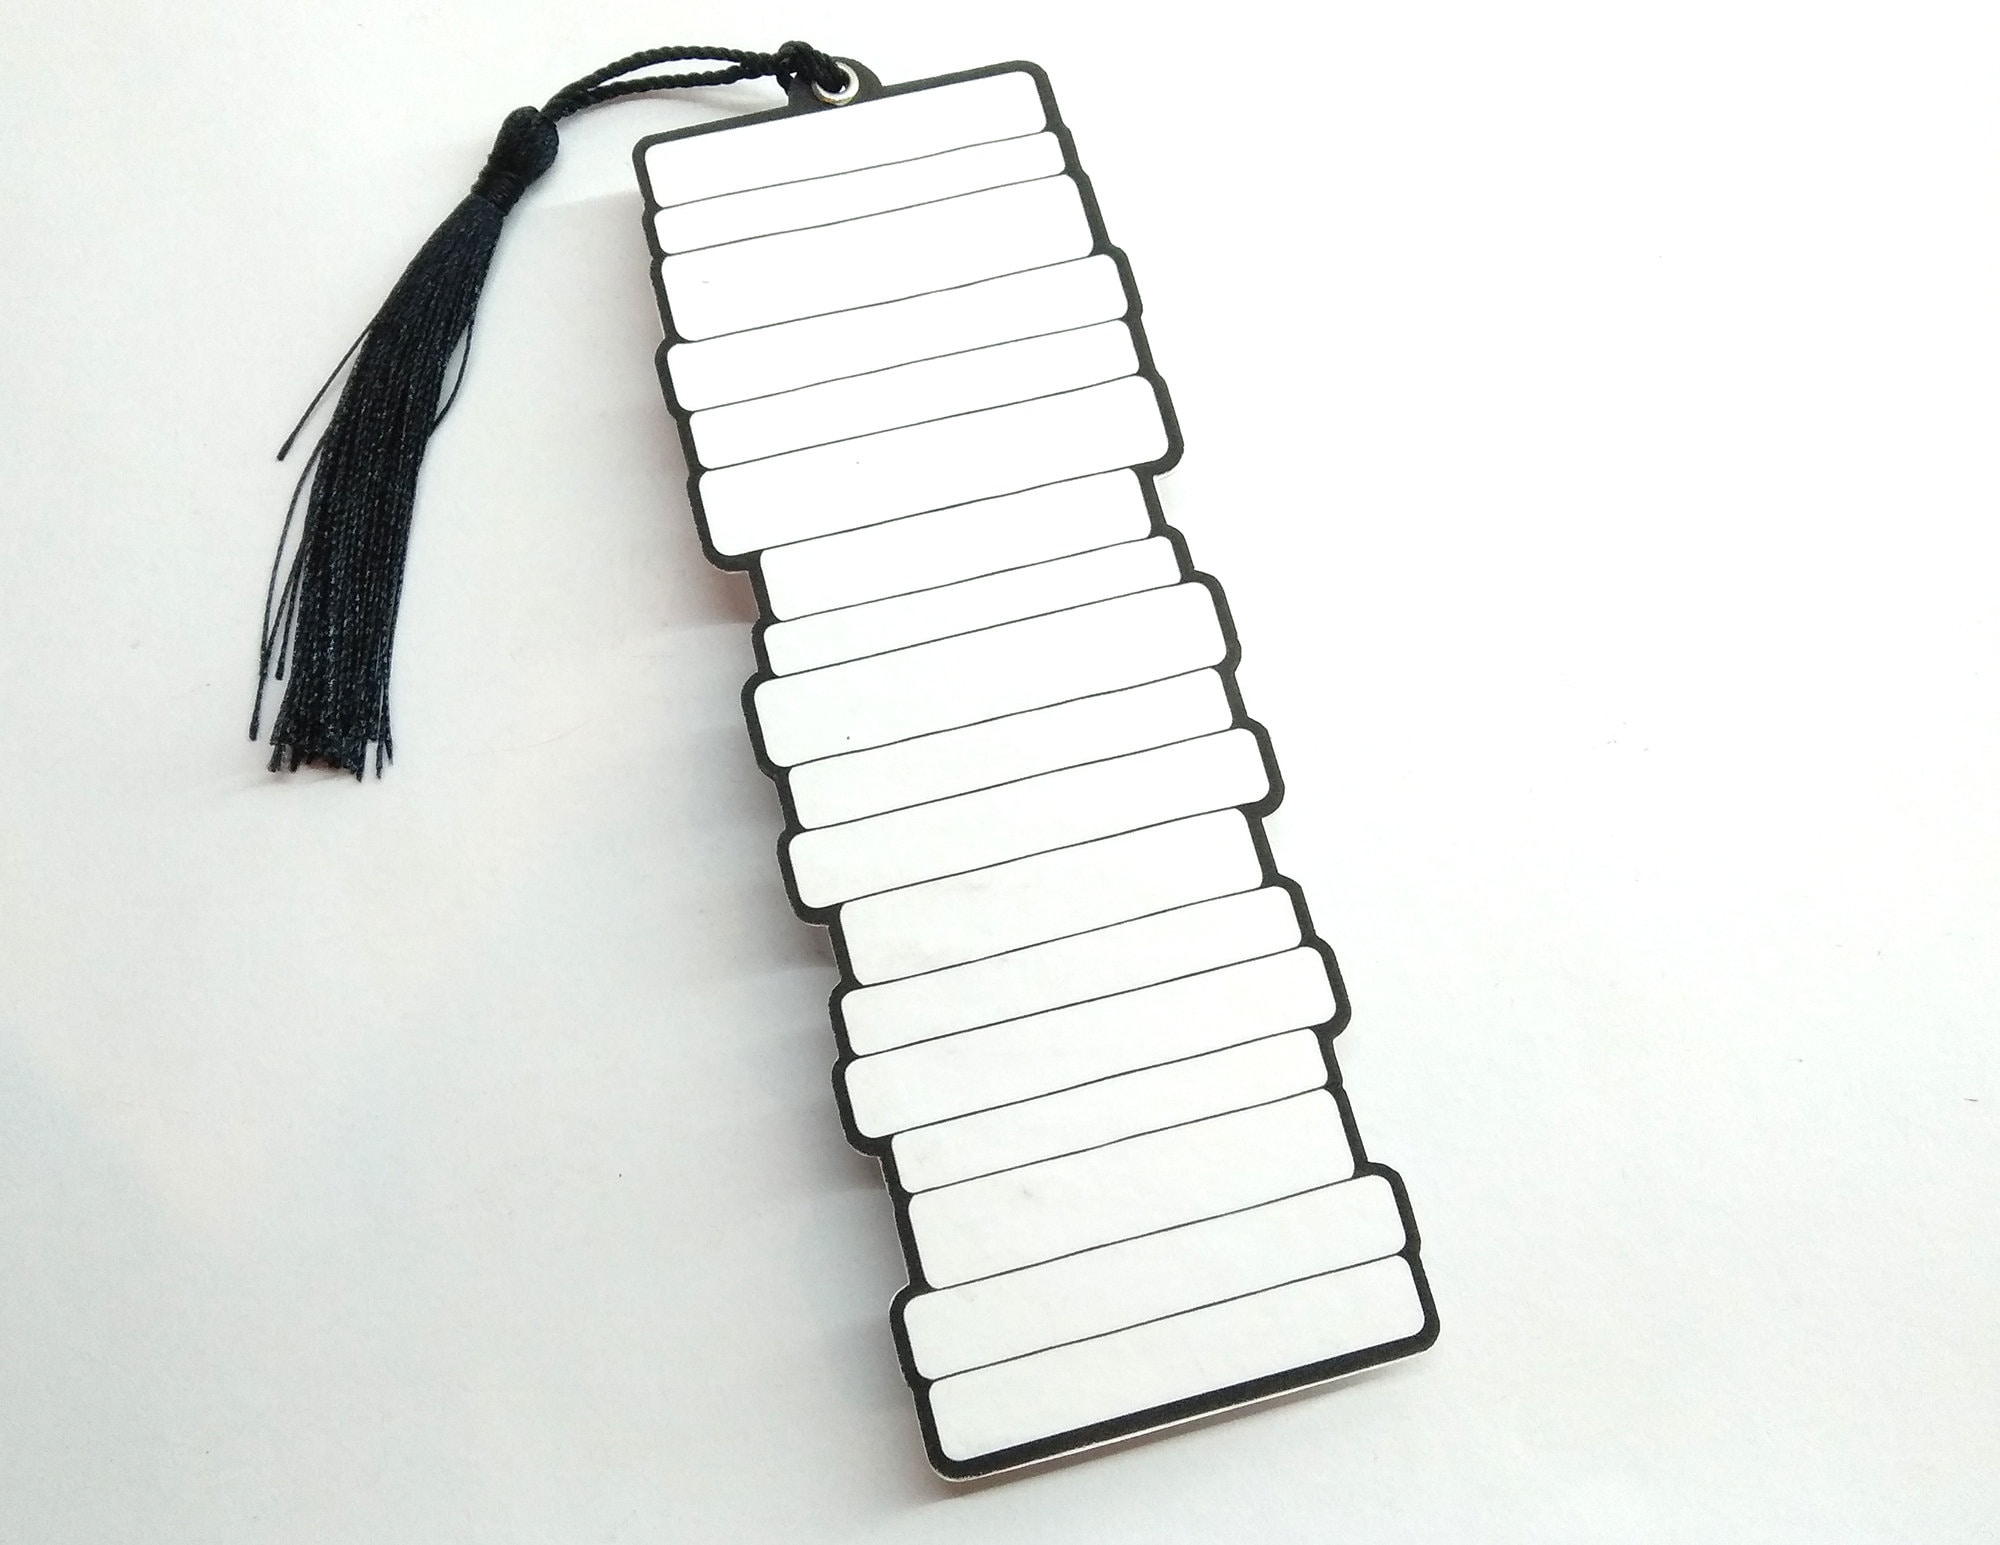  Tofficu 16 Pcs Double-Sided Bookmarks Template Magnet